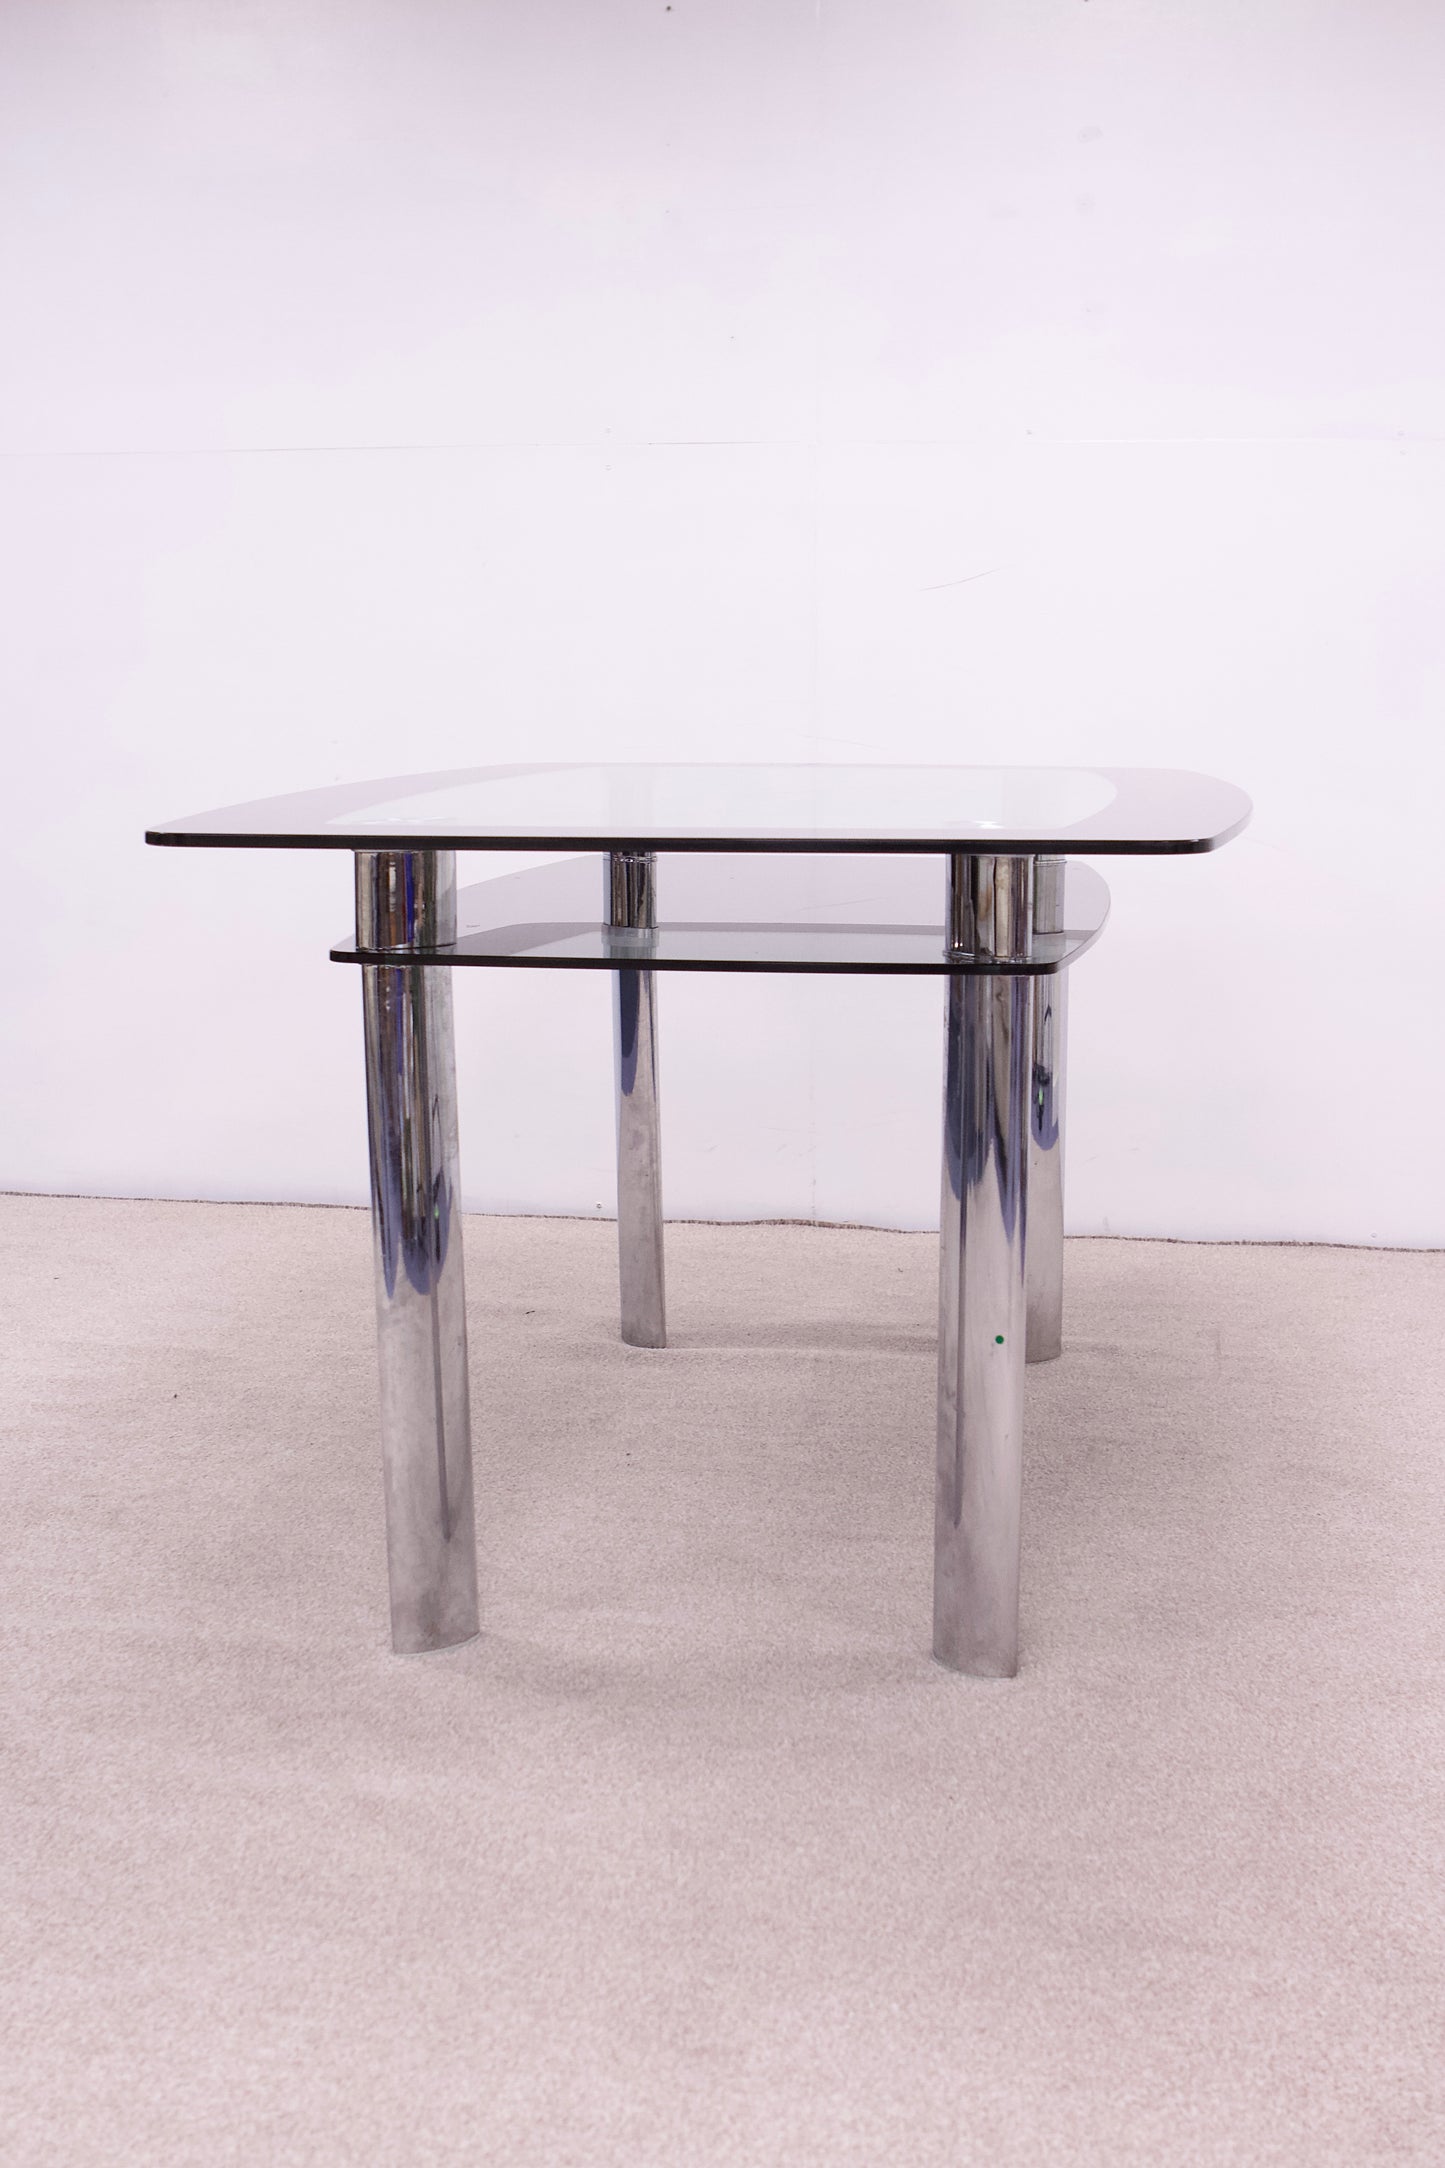 Glass Table with Chrome Legs